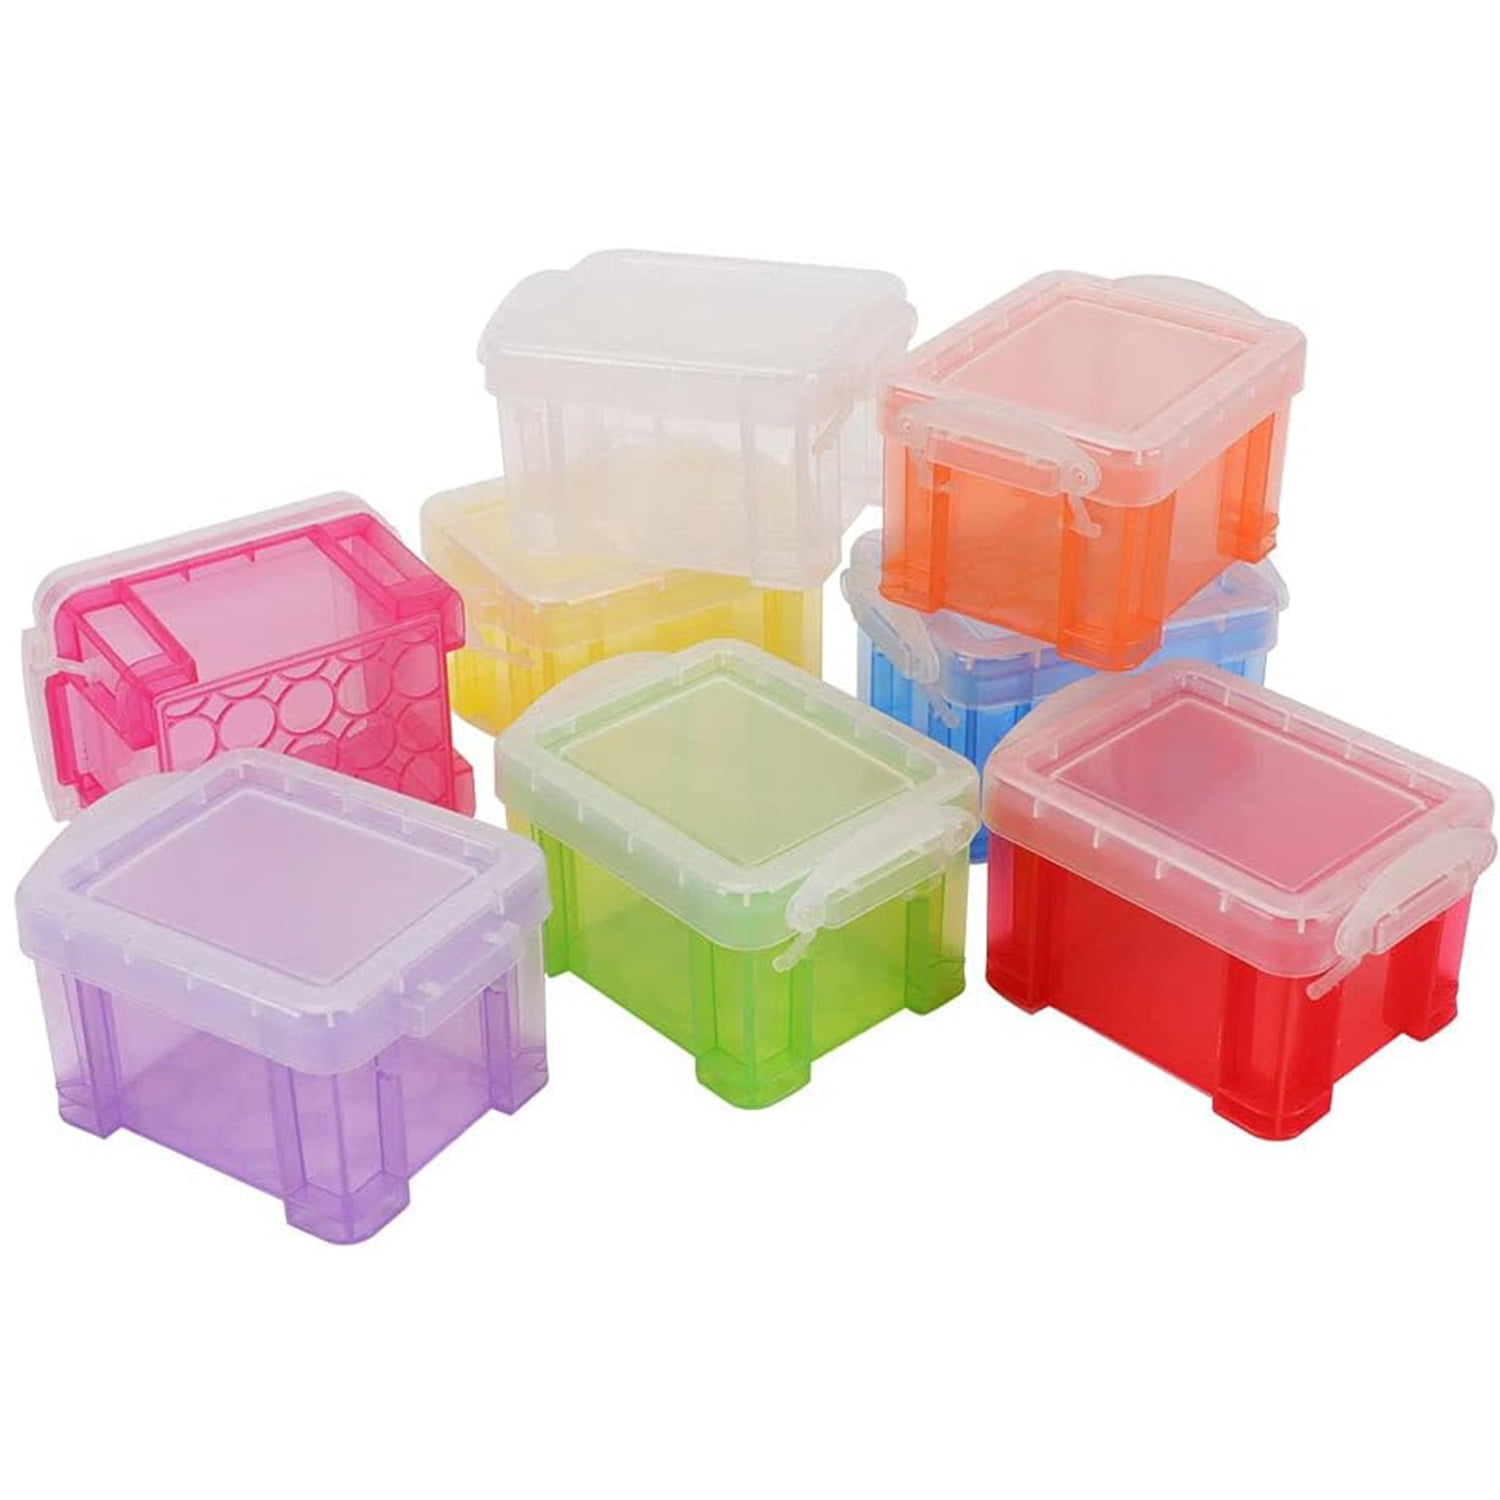 pmw - Farmar 11 - Small Tiny Containers Plastic Clear Boxes with Screw lid  12 ml (Size : 3.5 cm X 4.5 cm) - Pack of 12